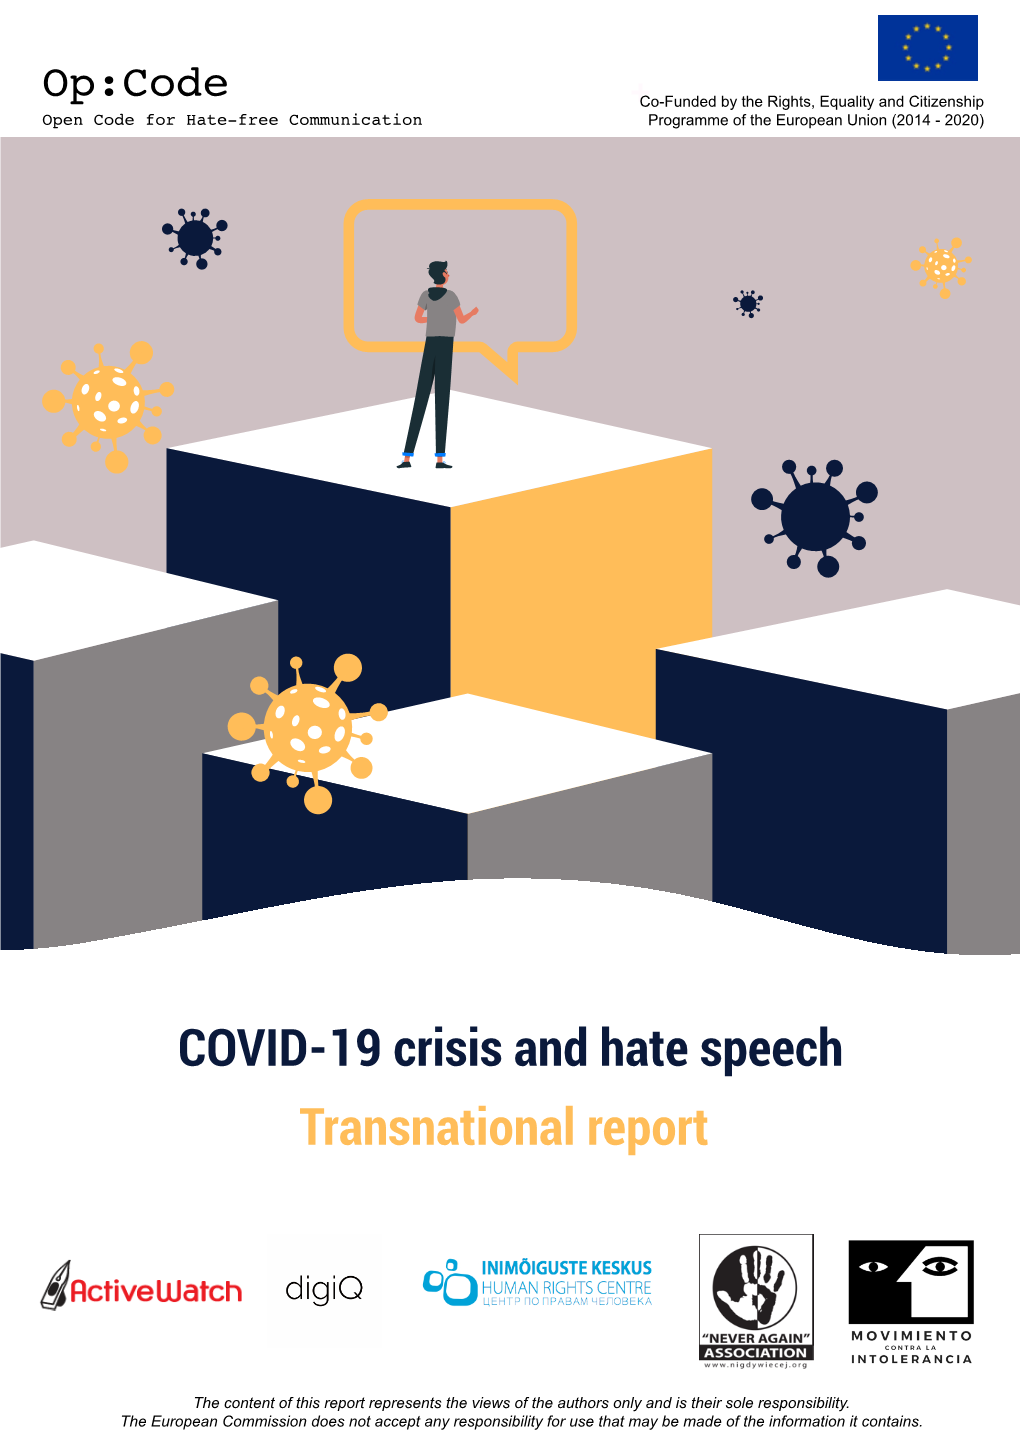 COVID-19 Crisis and Hate Speech Transnational Report